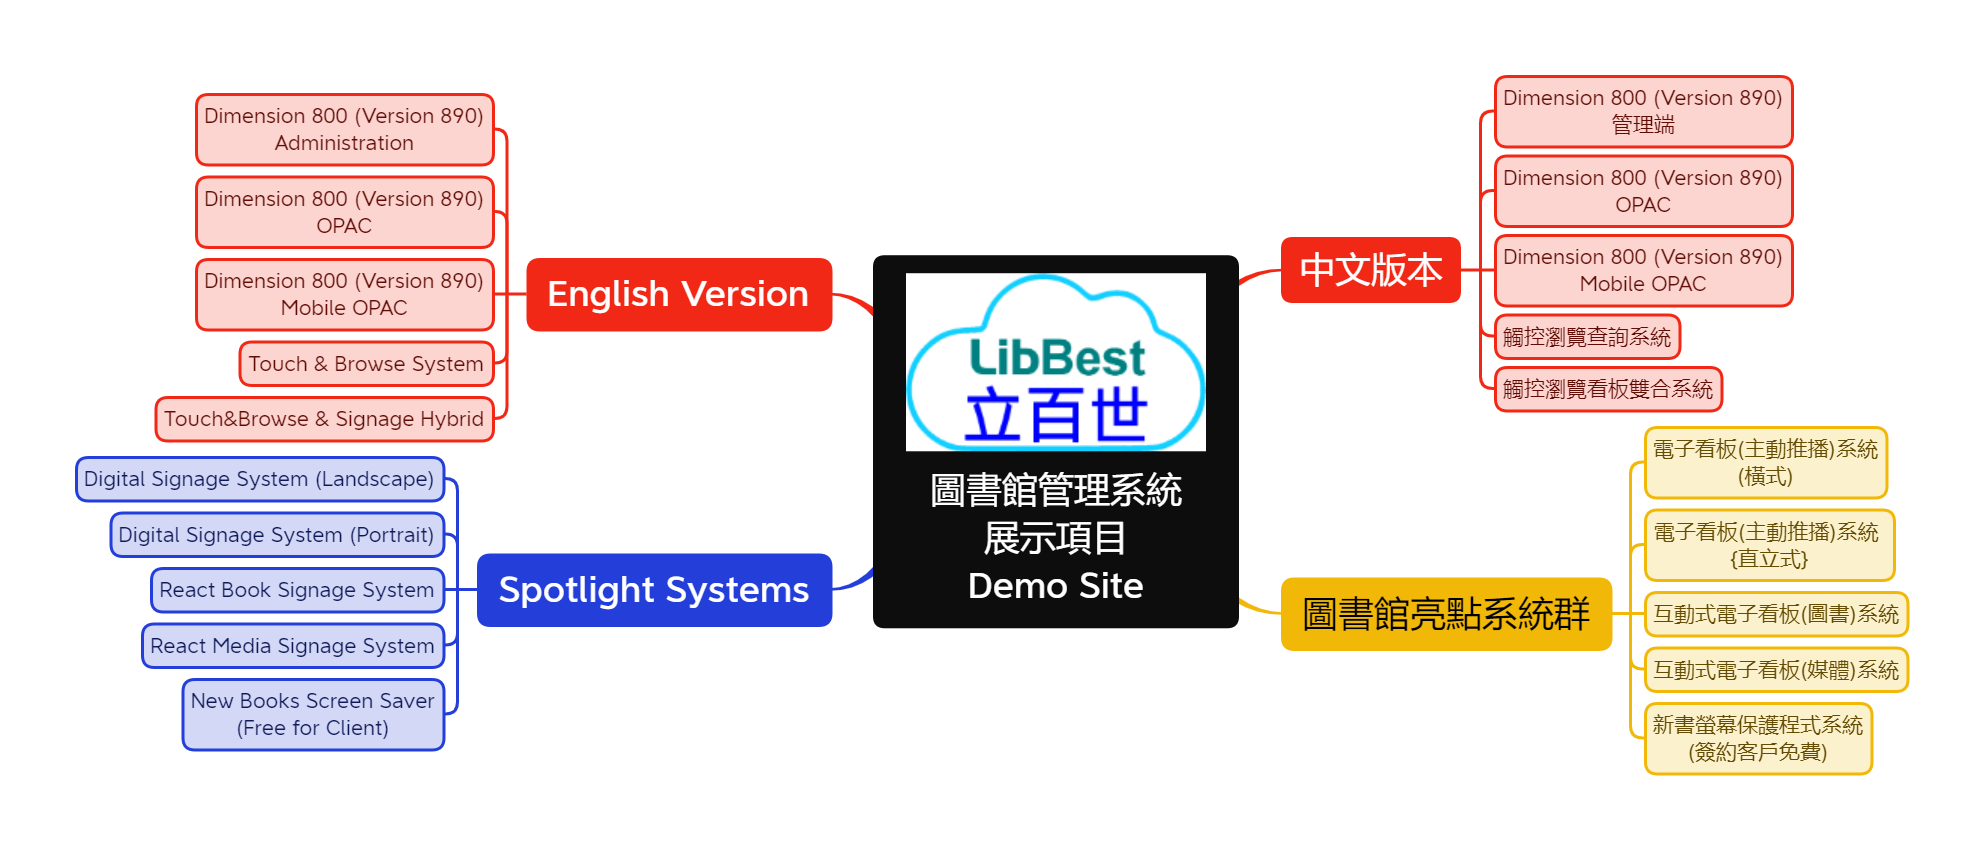 LibBest Library Systems Demo Site